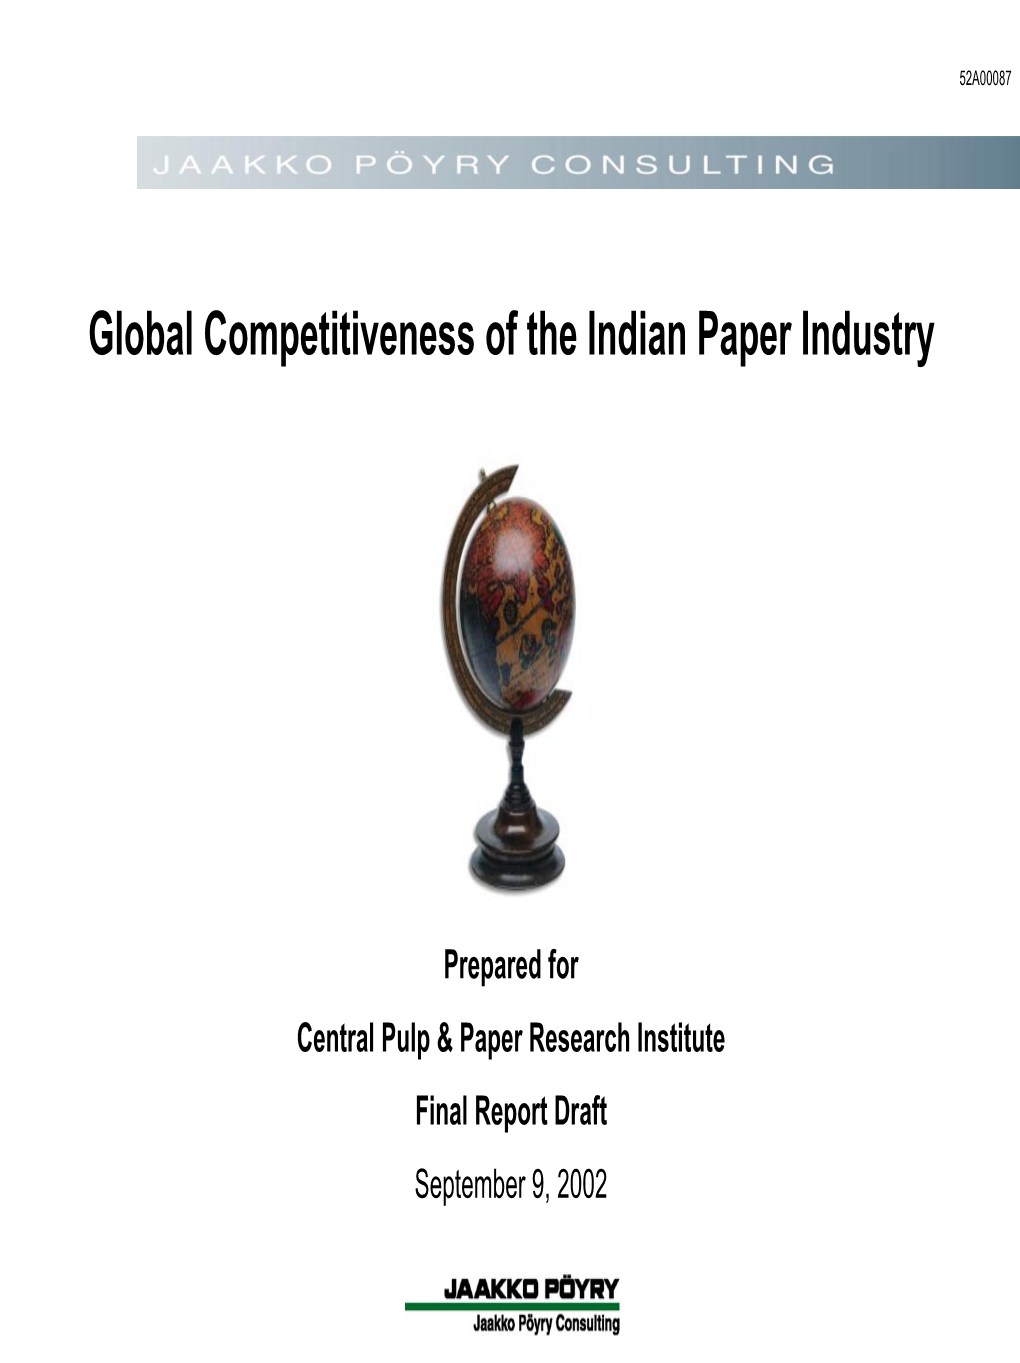 Global Competitiveness of the Indian Paper Industry